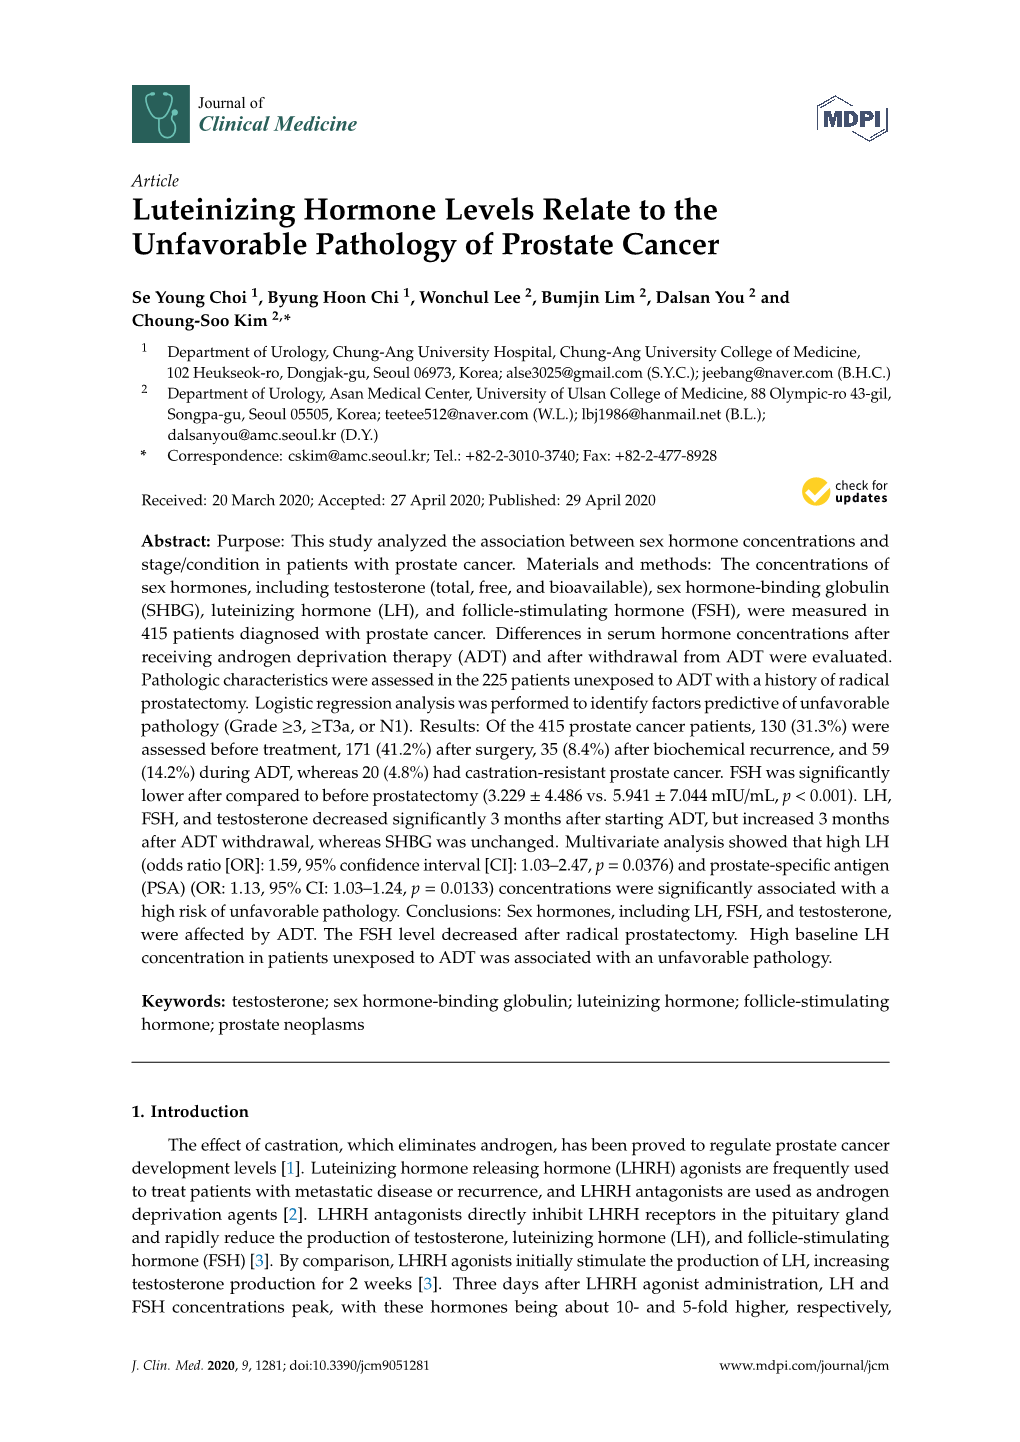 Luteinizing Hormone Levels Relate to the Unfavorable Pathology of Prostate Cancer